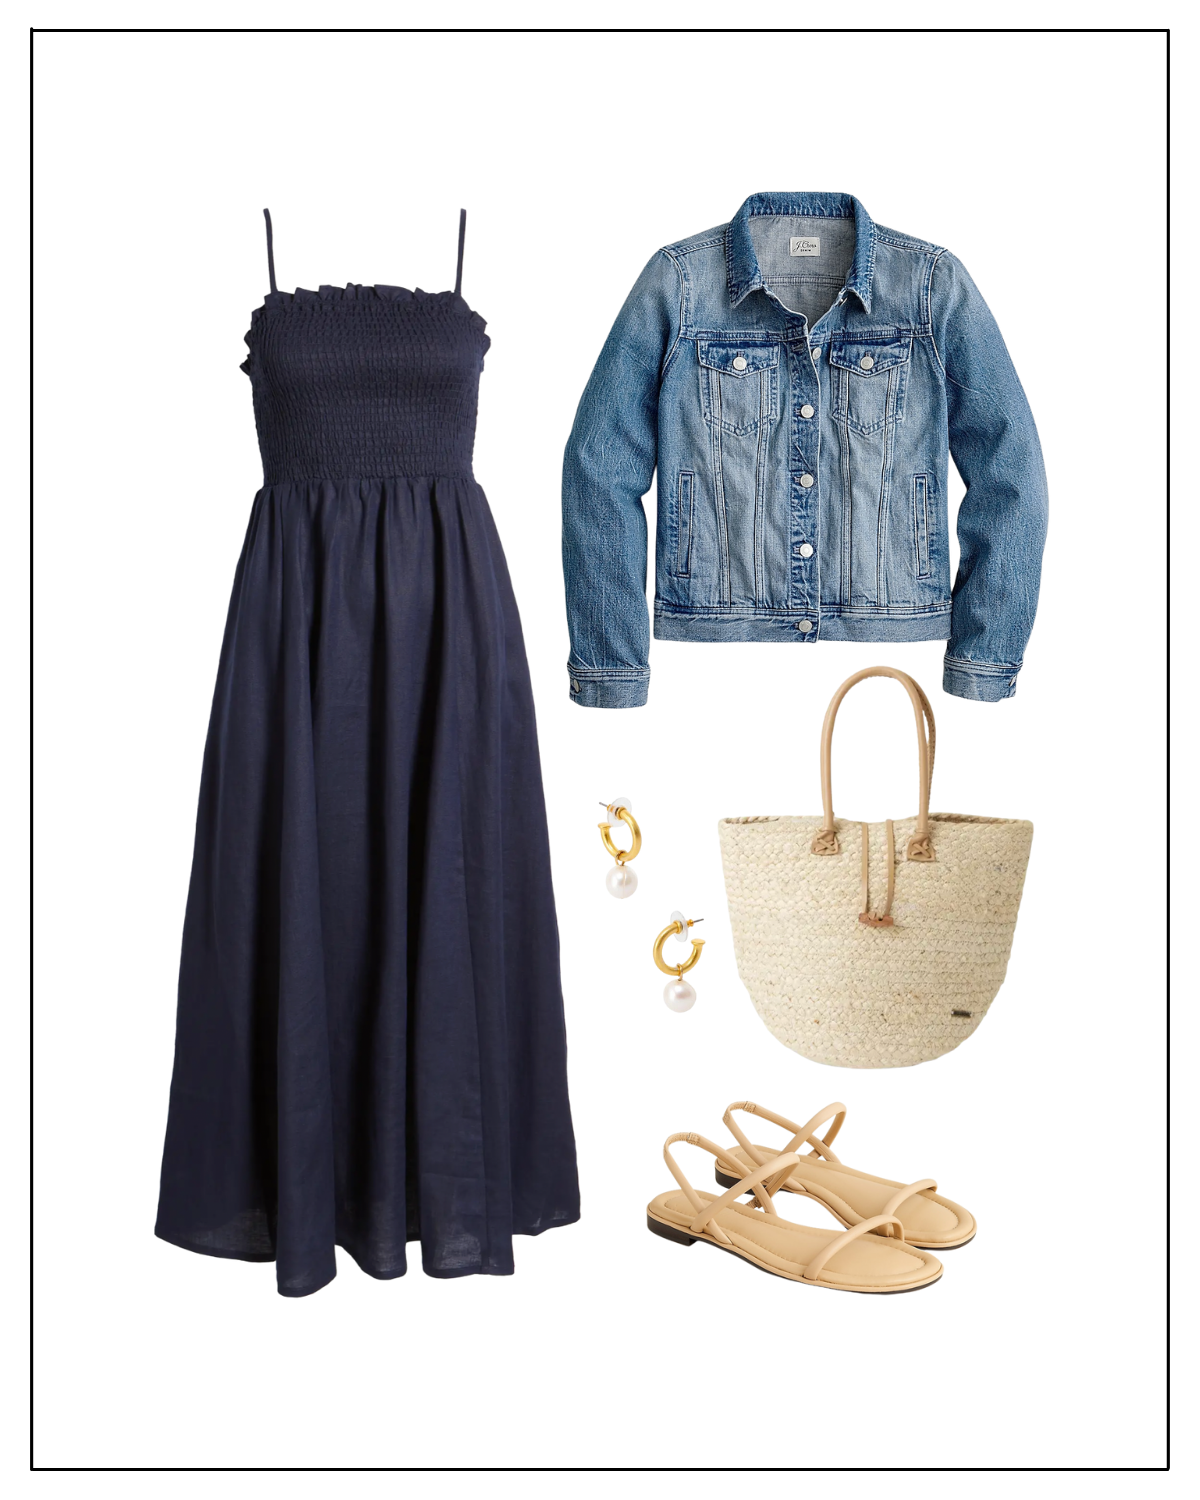 How to Style a Denim Jacket with a dress